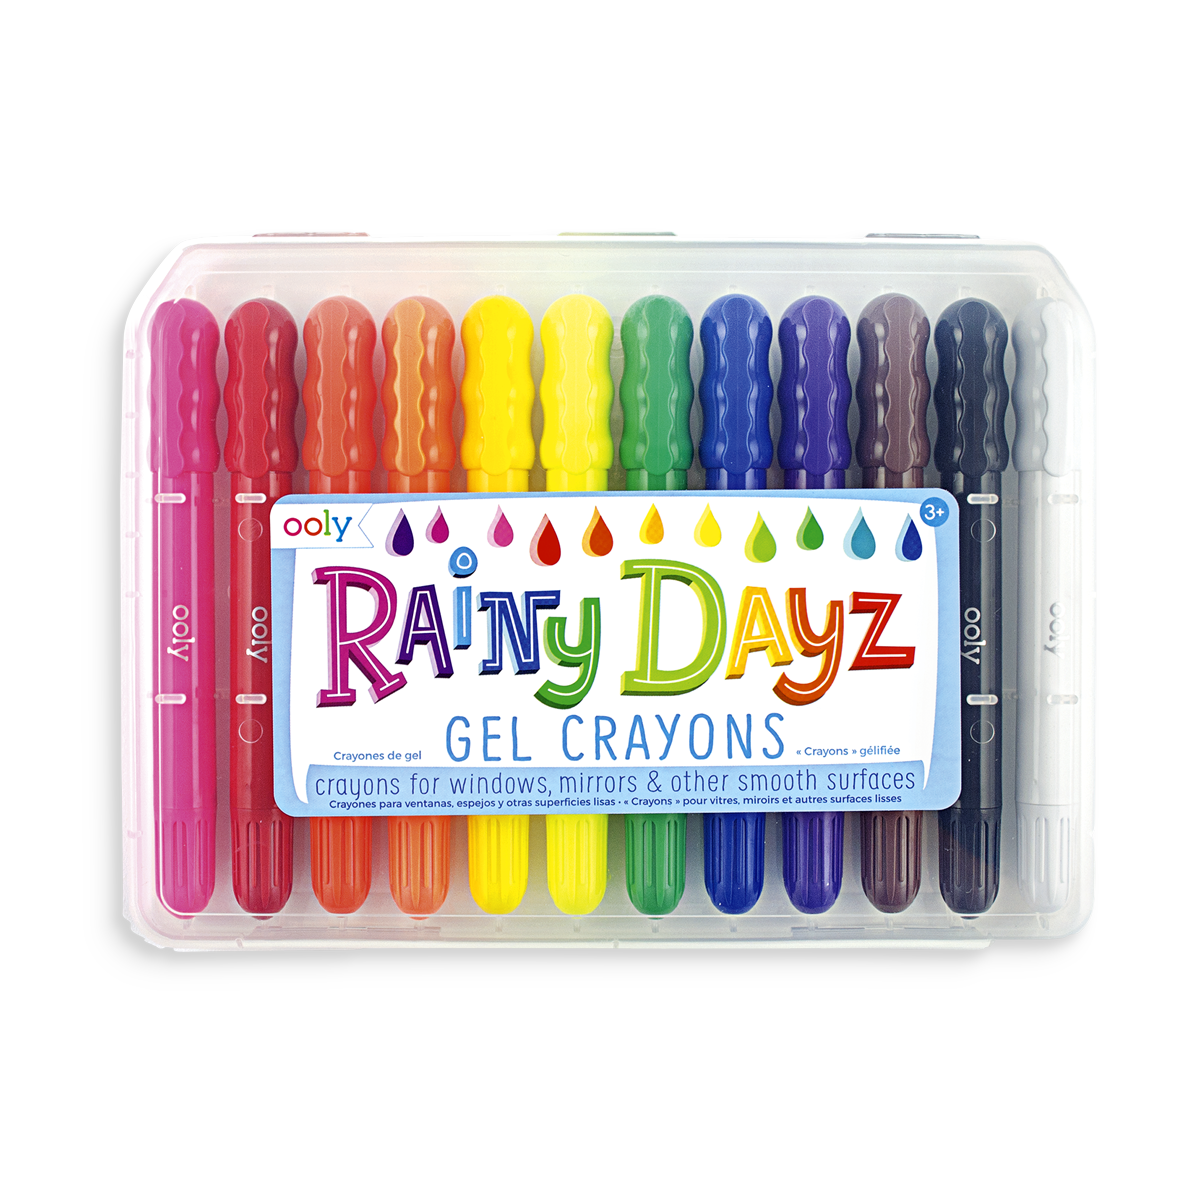 Mr. Pen- Crayons, Gel Crayons, 12 Pack, Twist up Crayons, Non